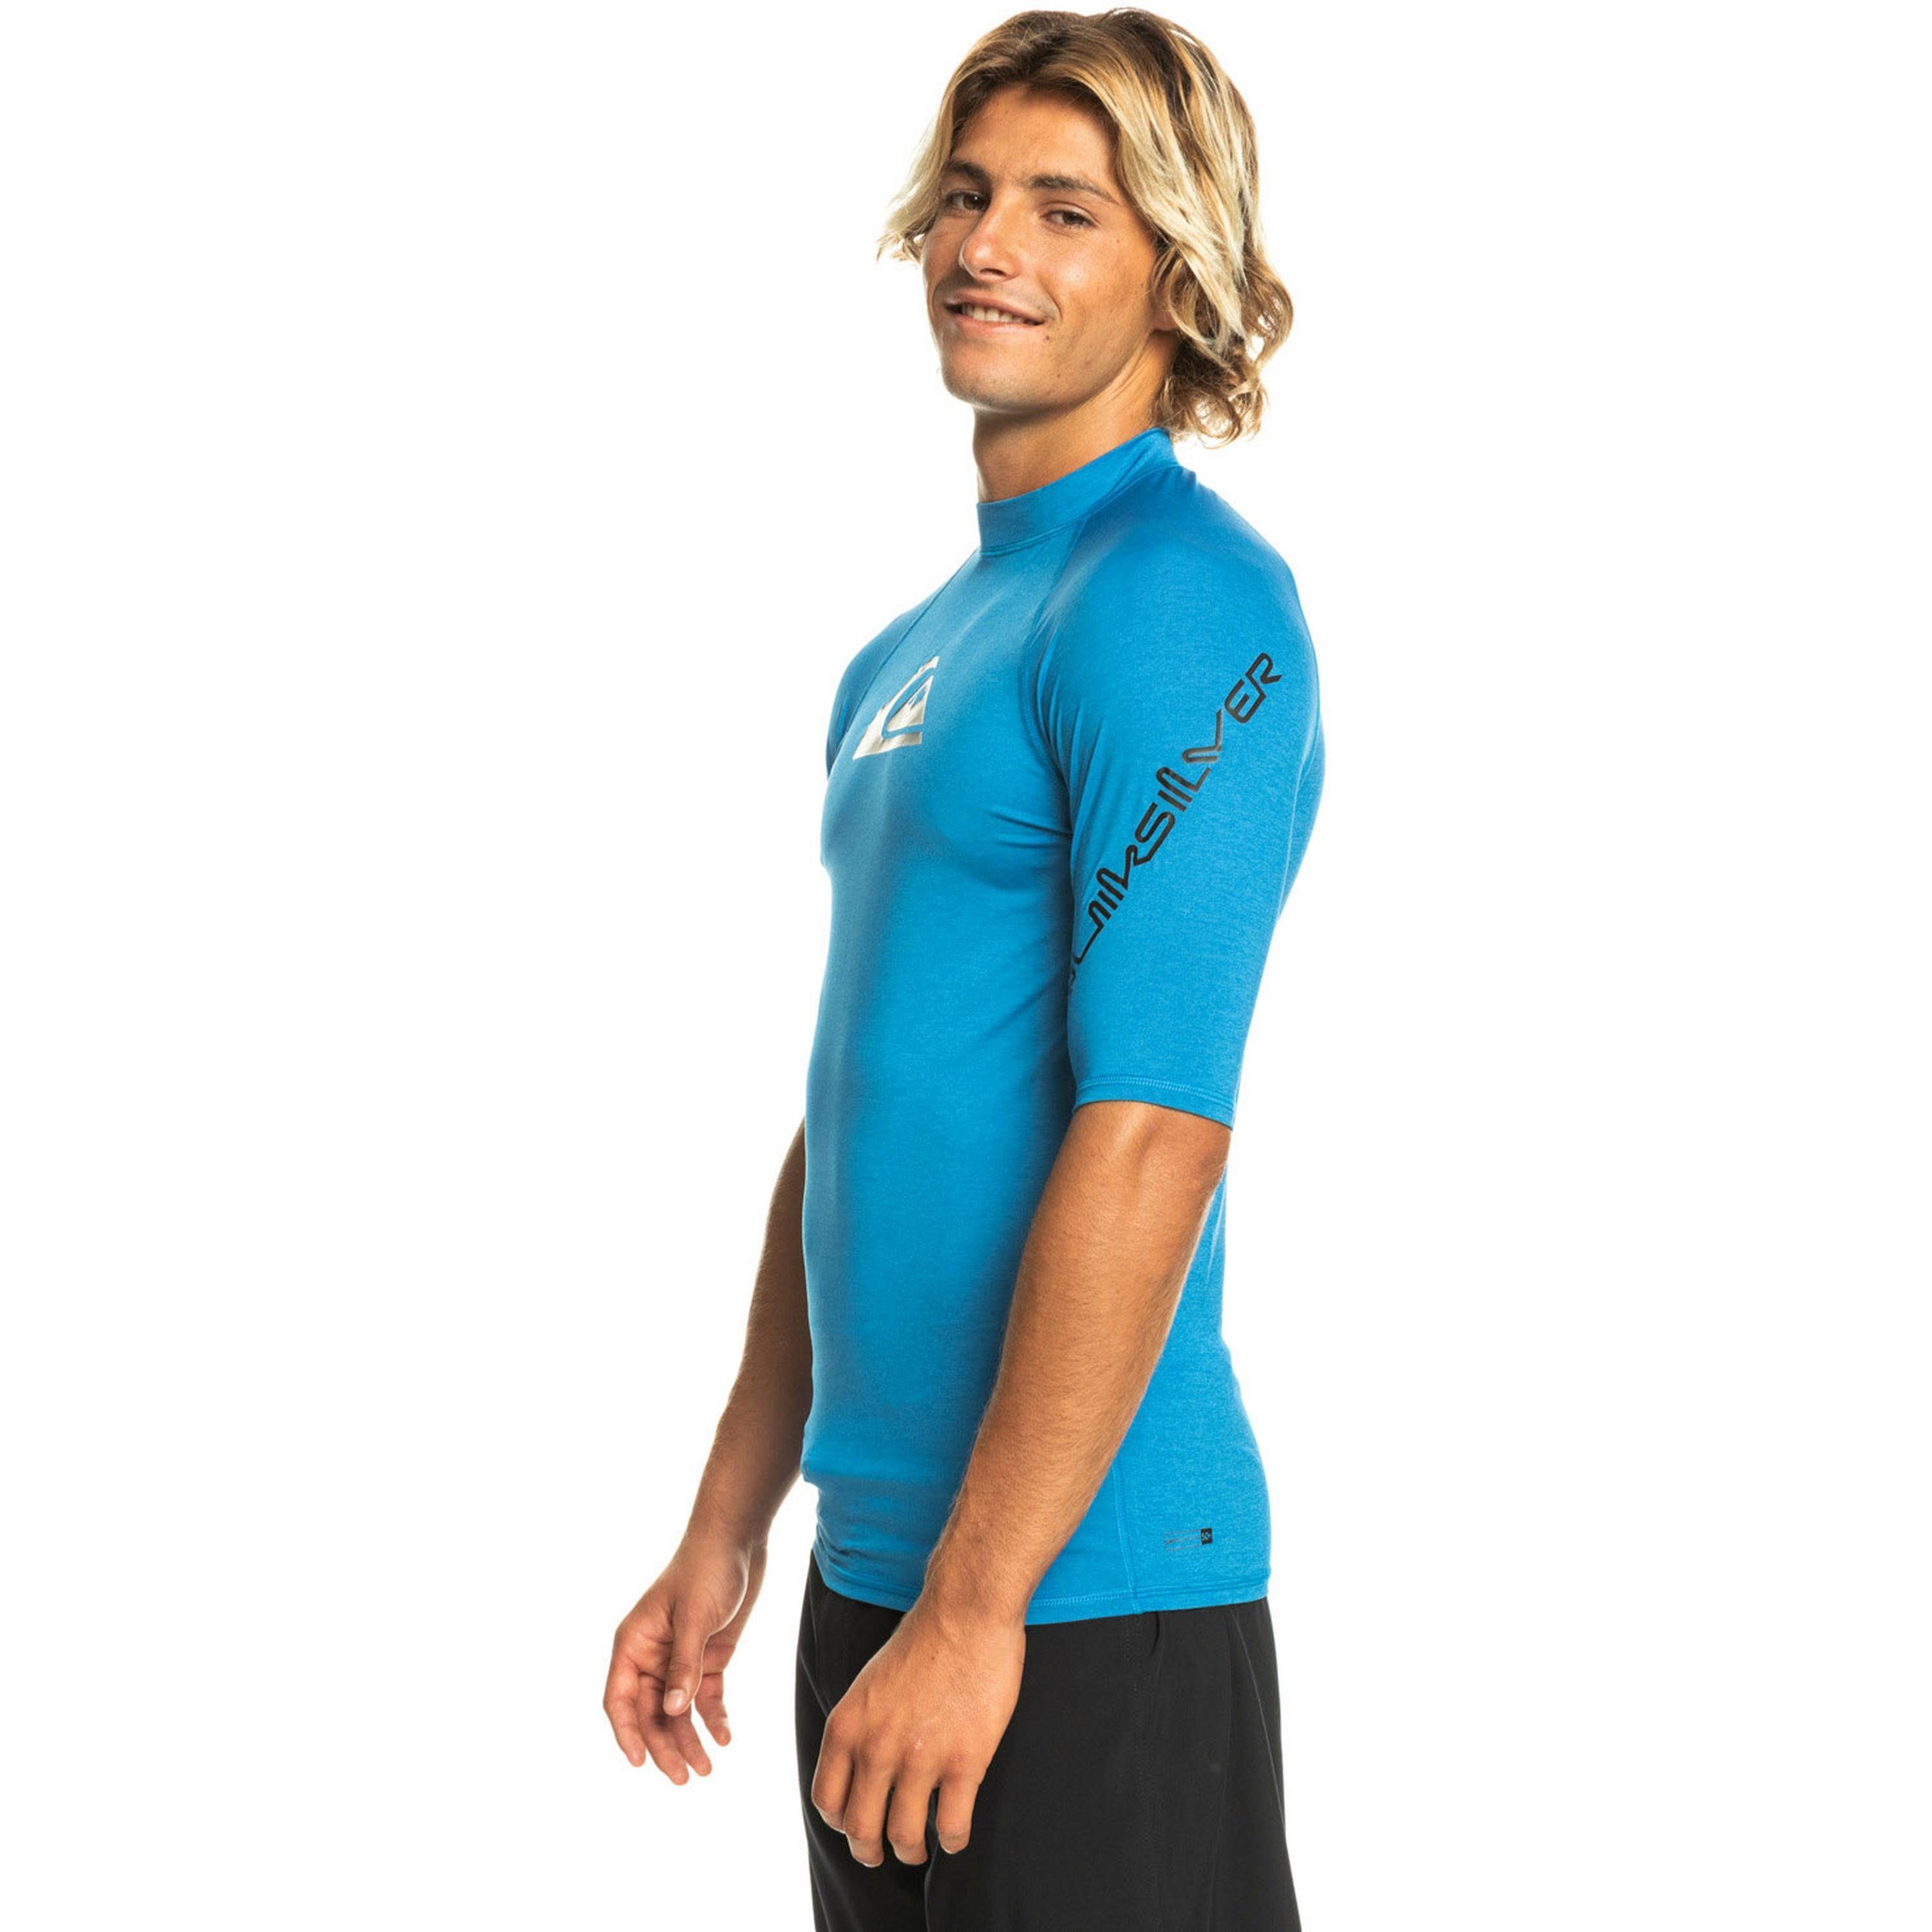 TIME T-Shirt Quiksilver ALL blue heather snorkel